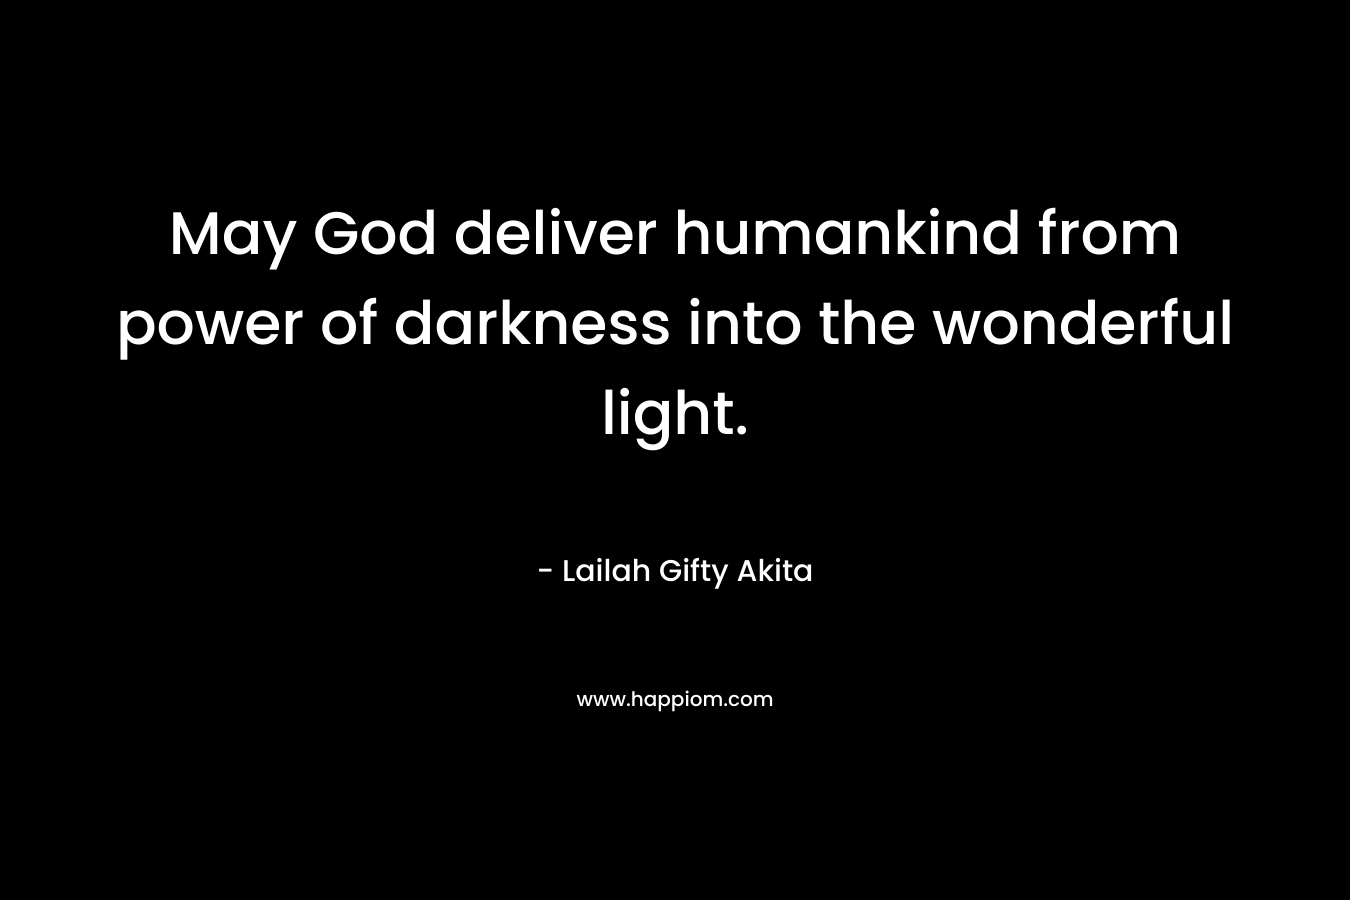 May God deliver humankind from power of darkness into the wonderful light.